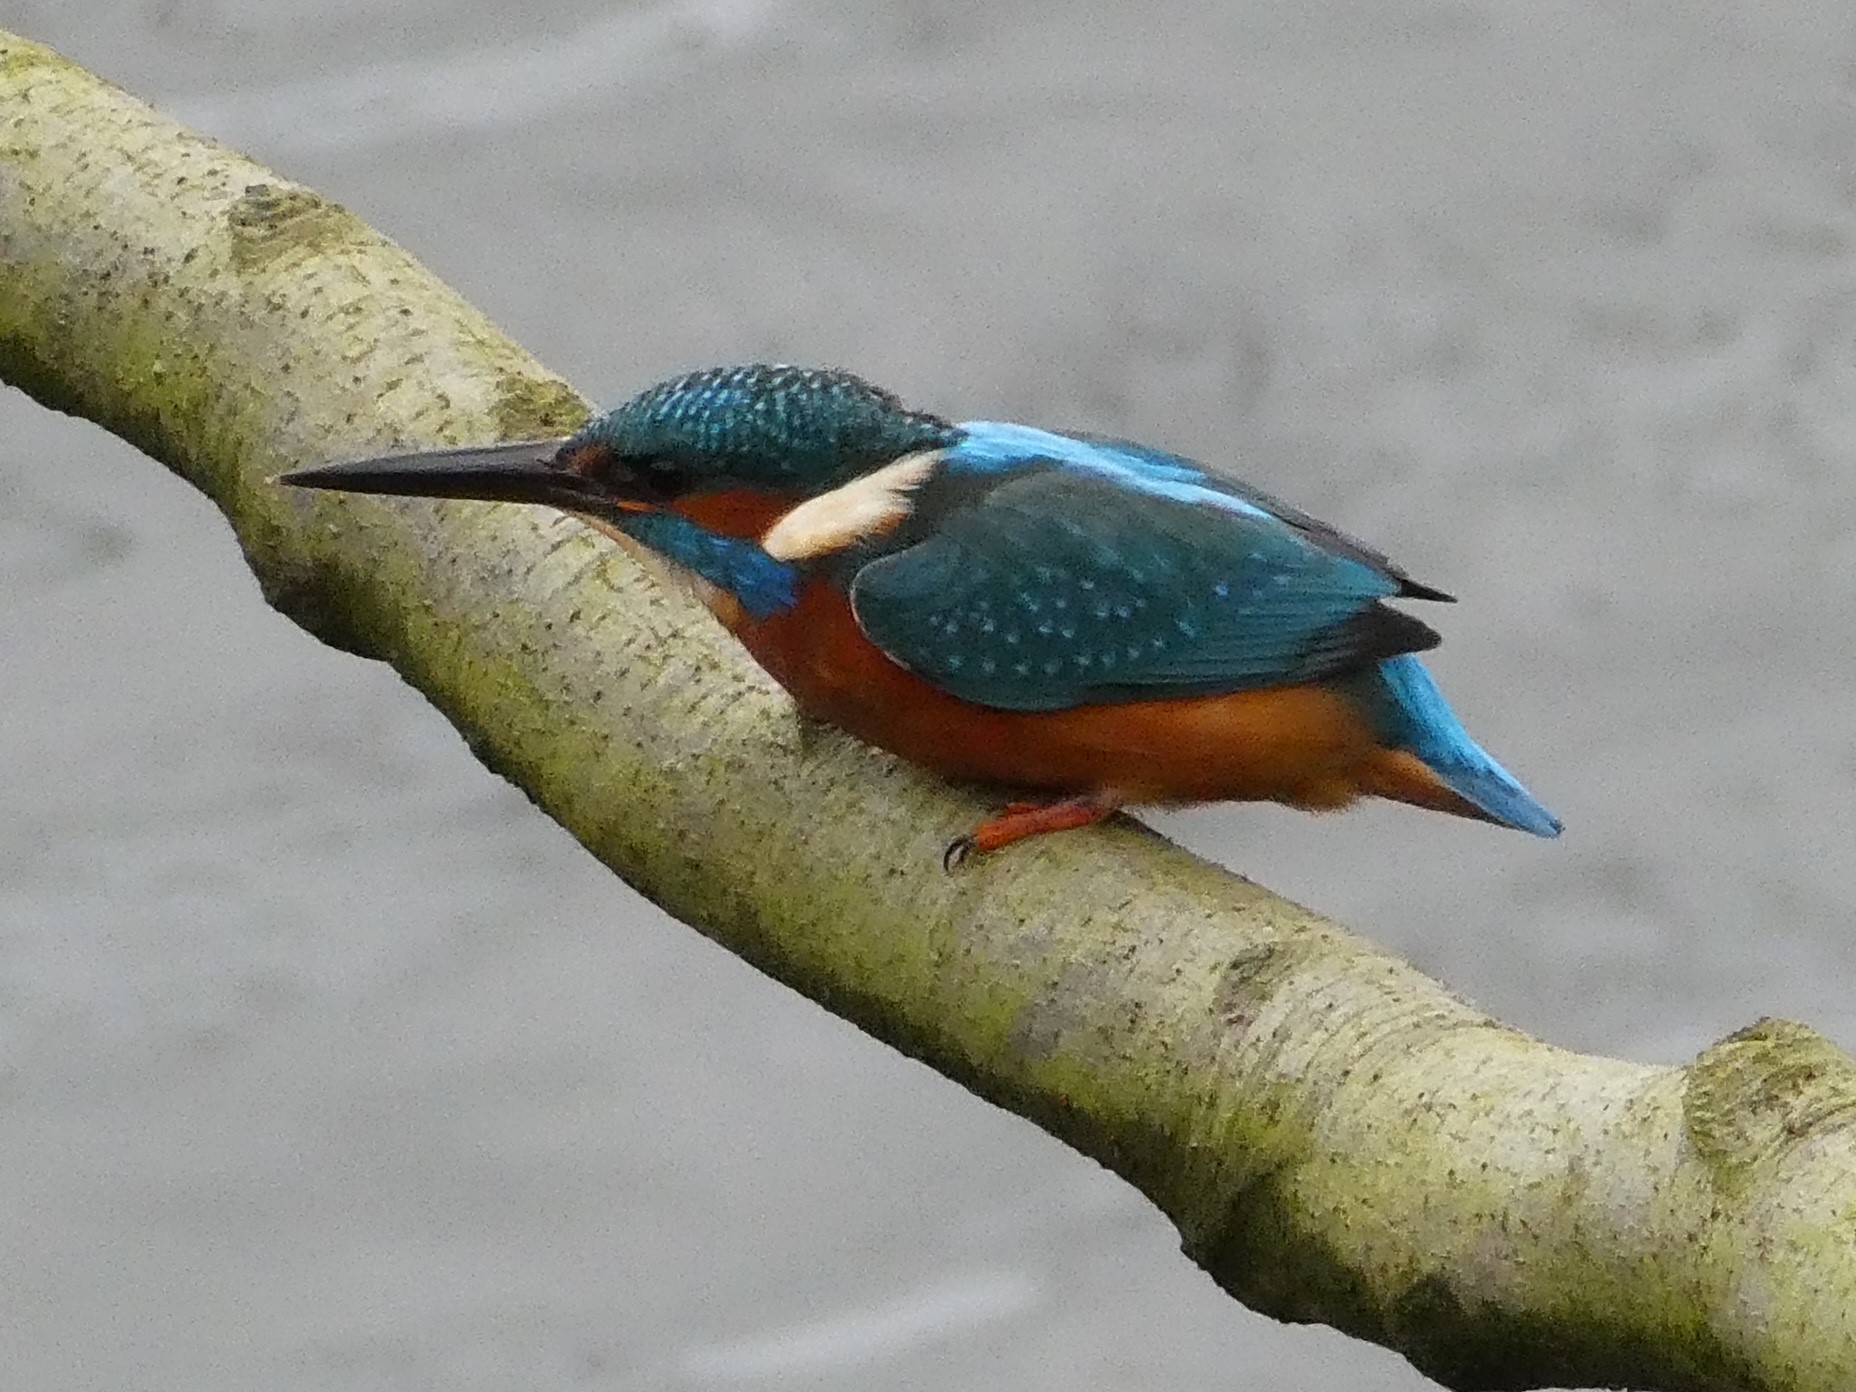 Julies hoping her next kingfisher photo will have a fish in its mouth